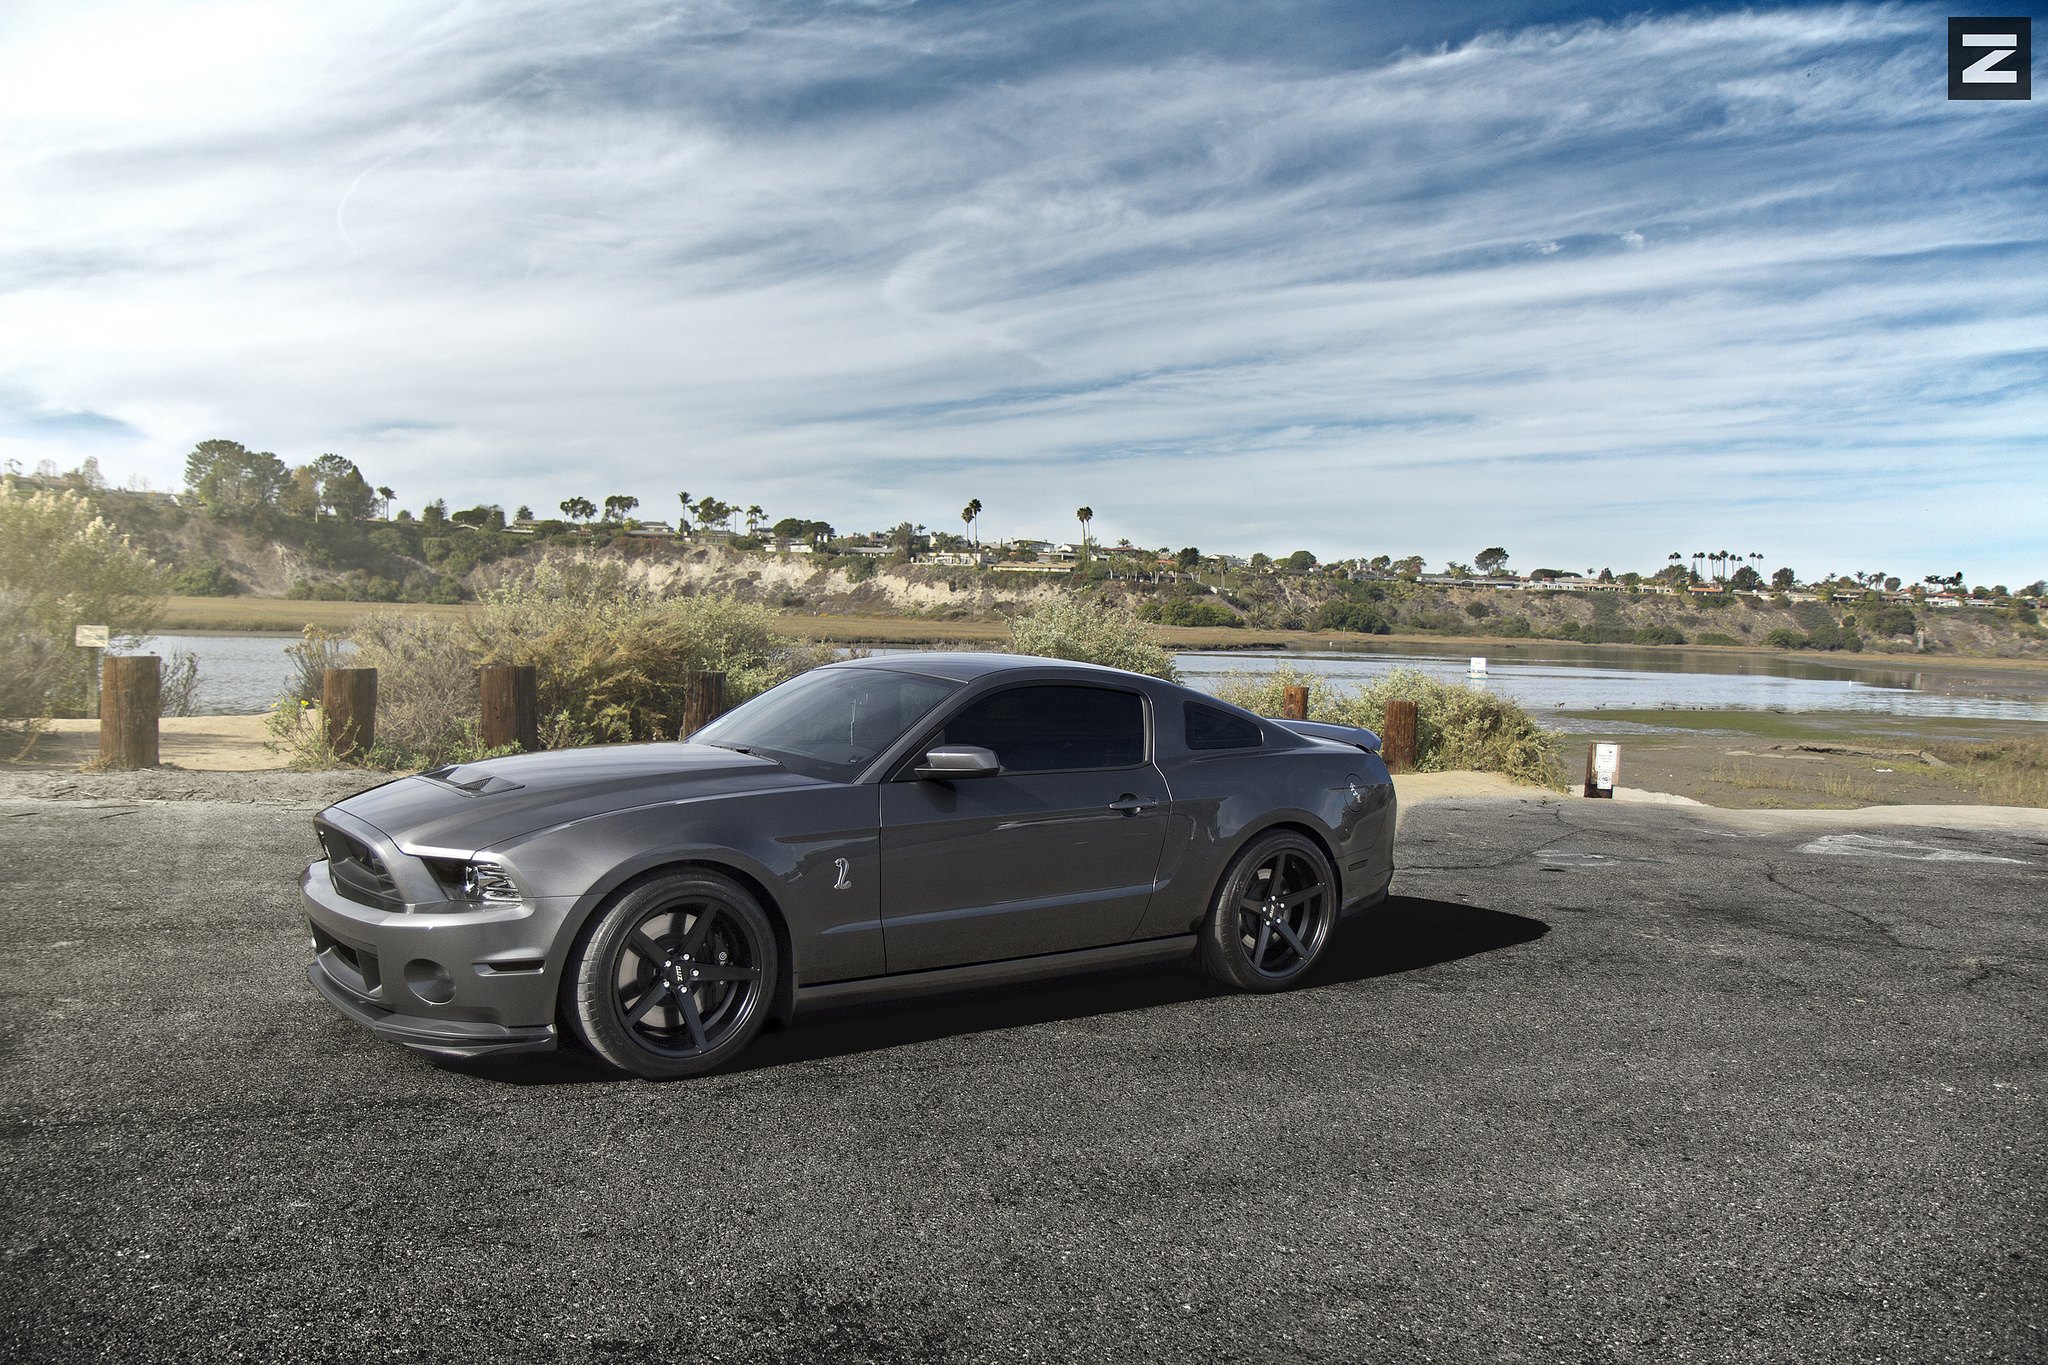 Custom Vented Hood on Gray Ford Mustang - Photo by Zito Wheels